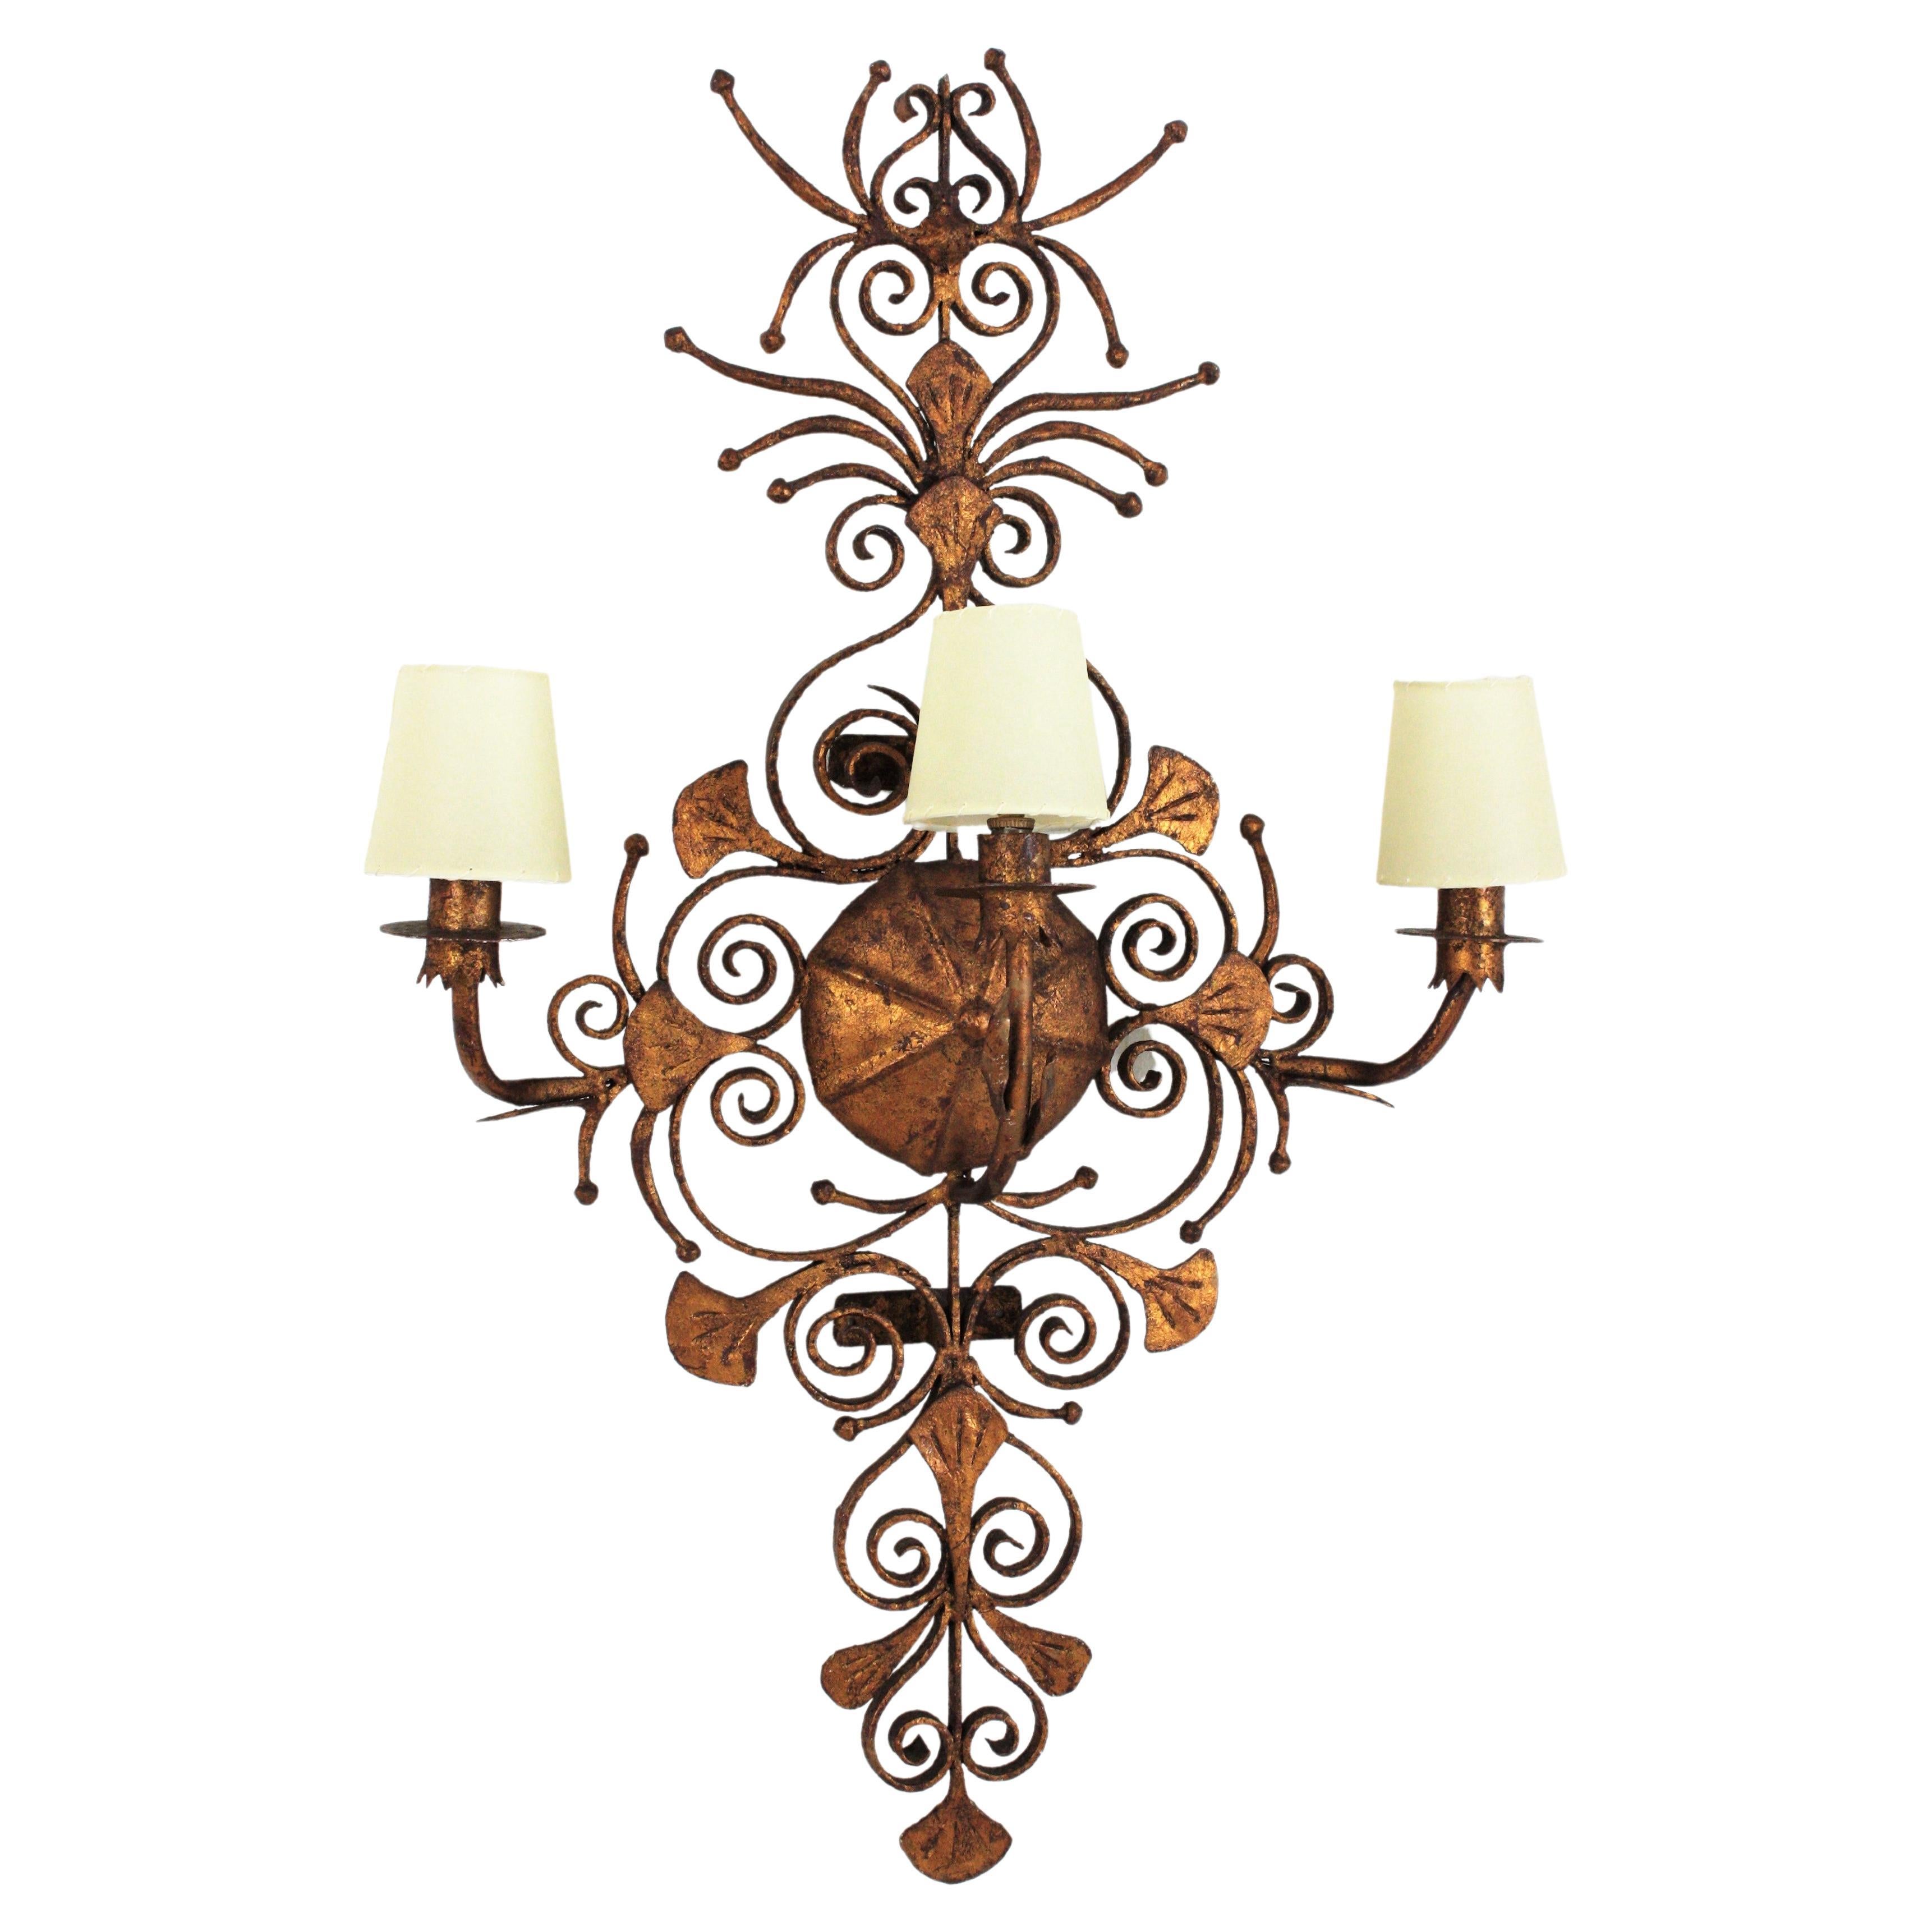 Spanish Revival Scrollwork Large Wall Sconce in Gilt Wrought Iron